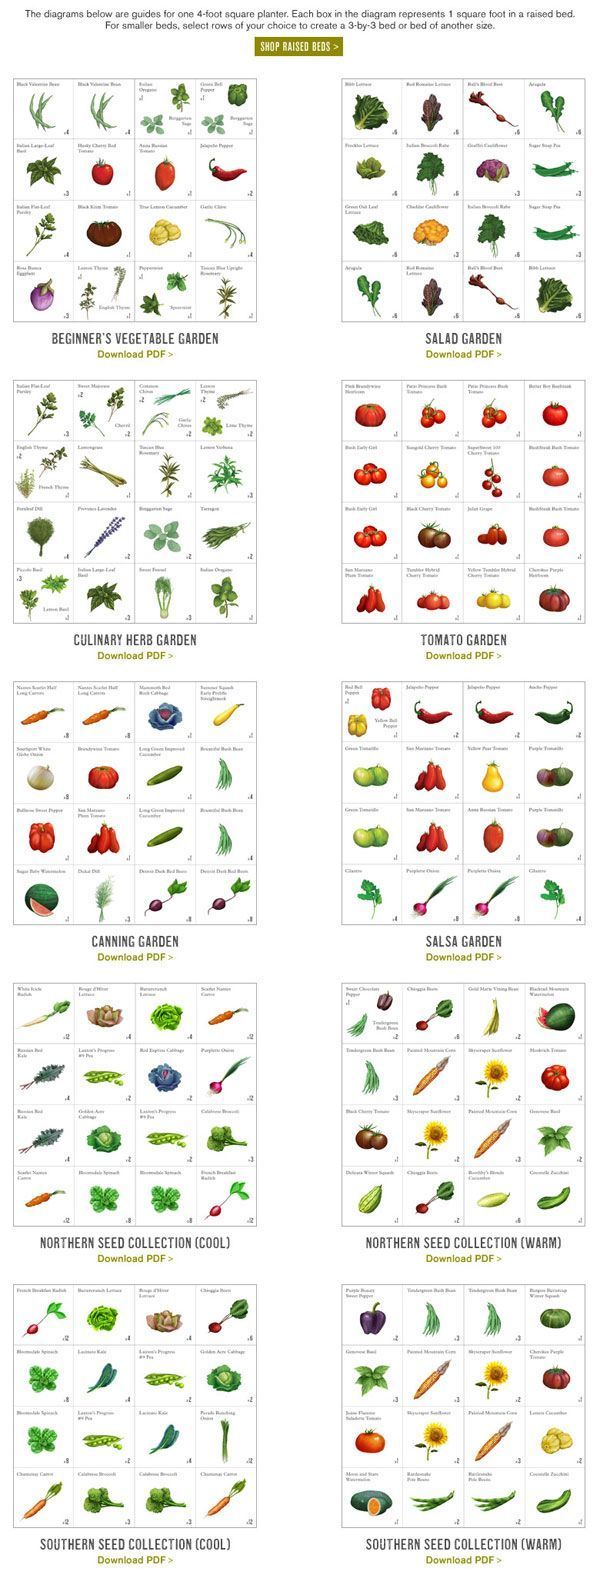 These great printable layouts will help anyone plan their garden beds well!